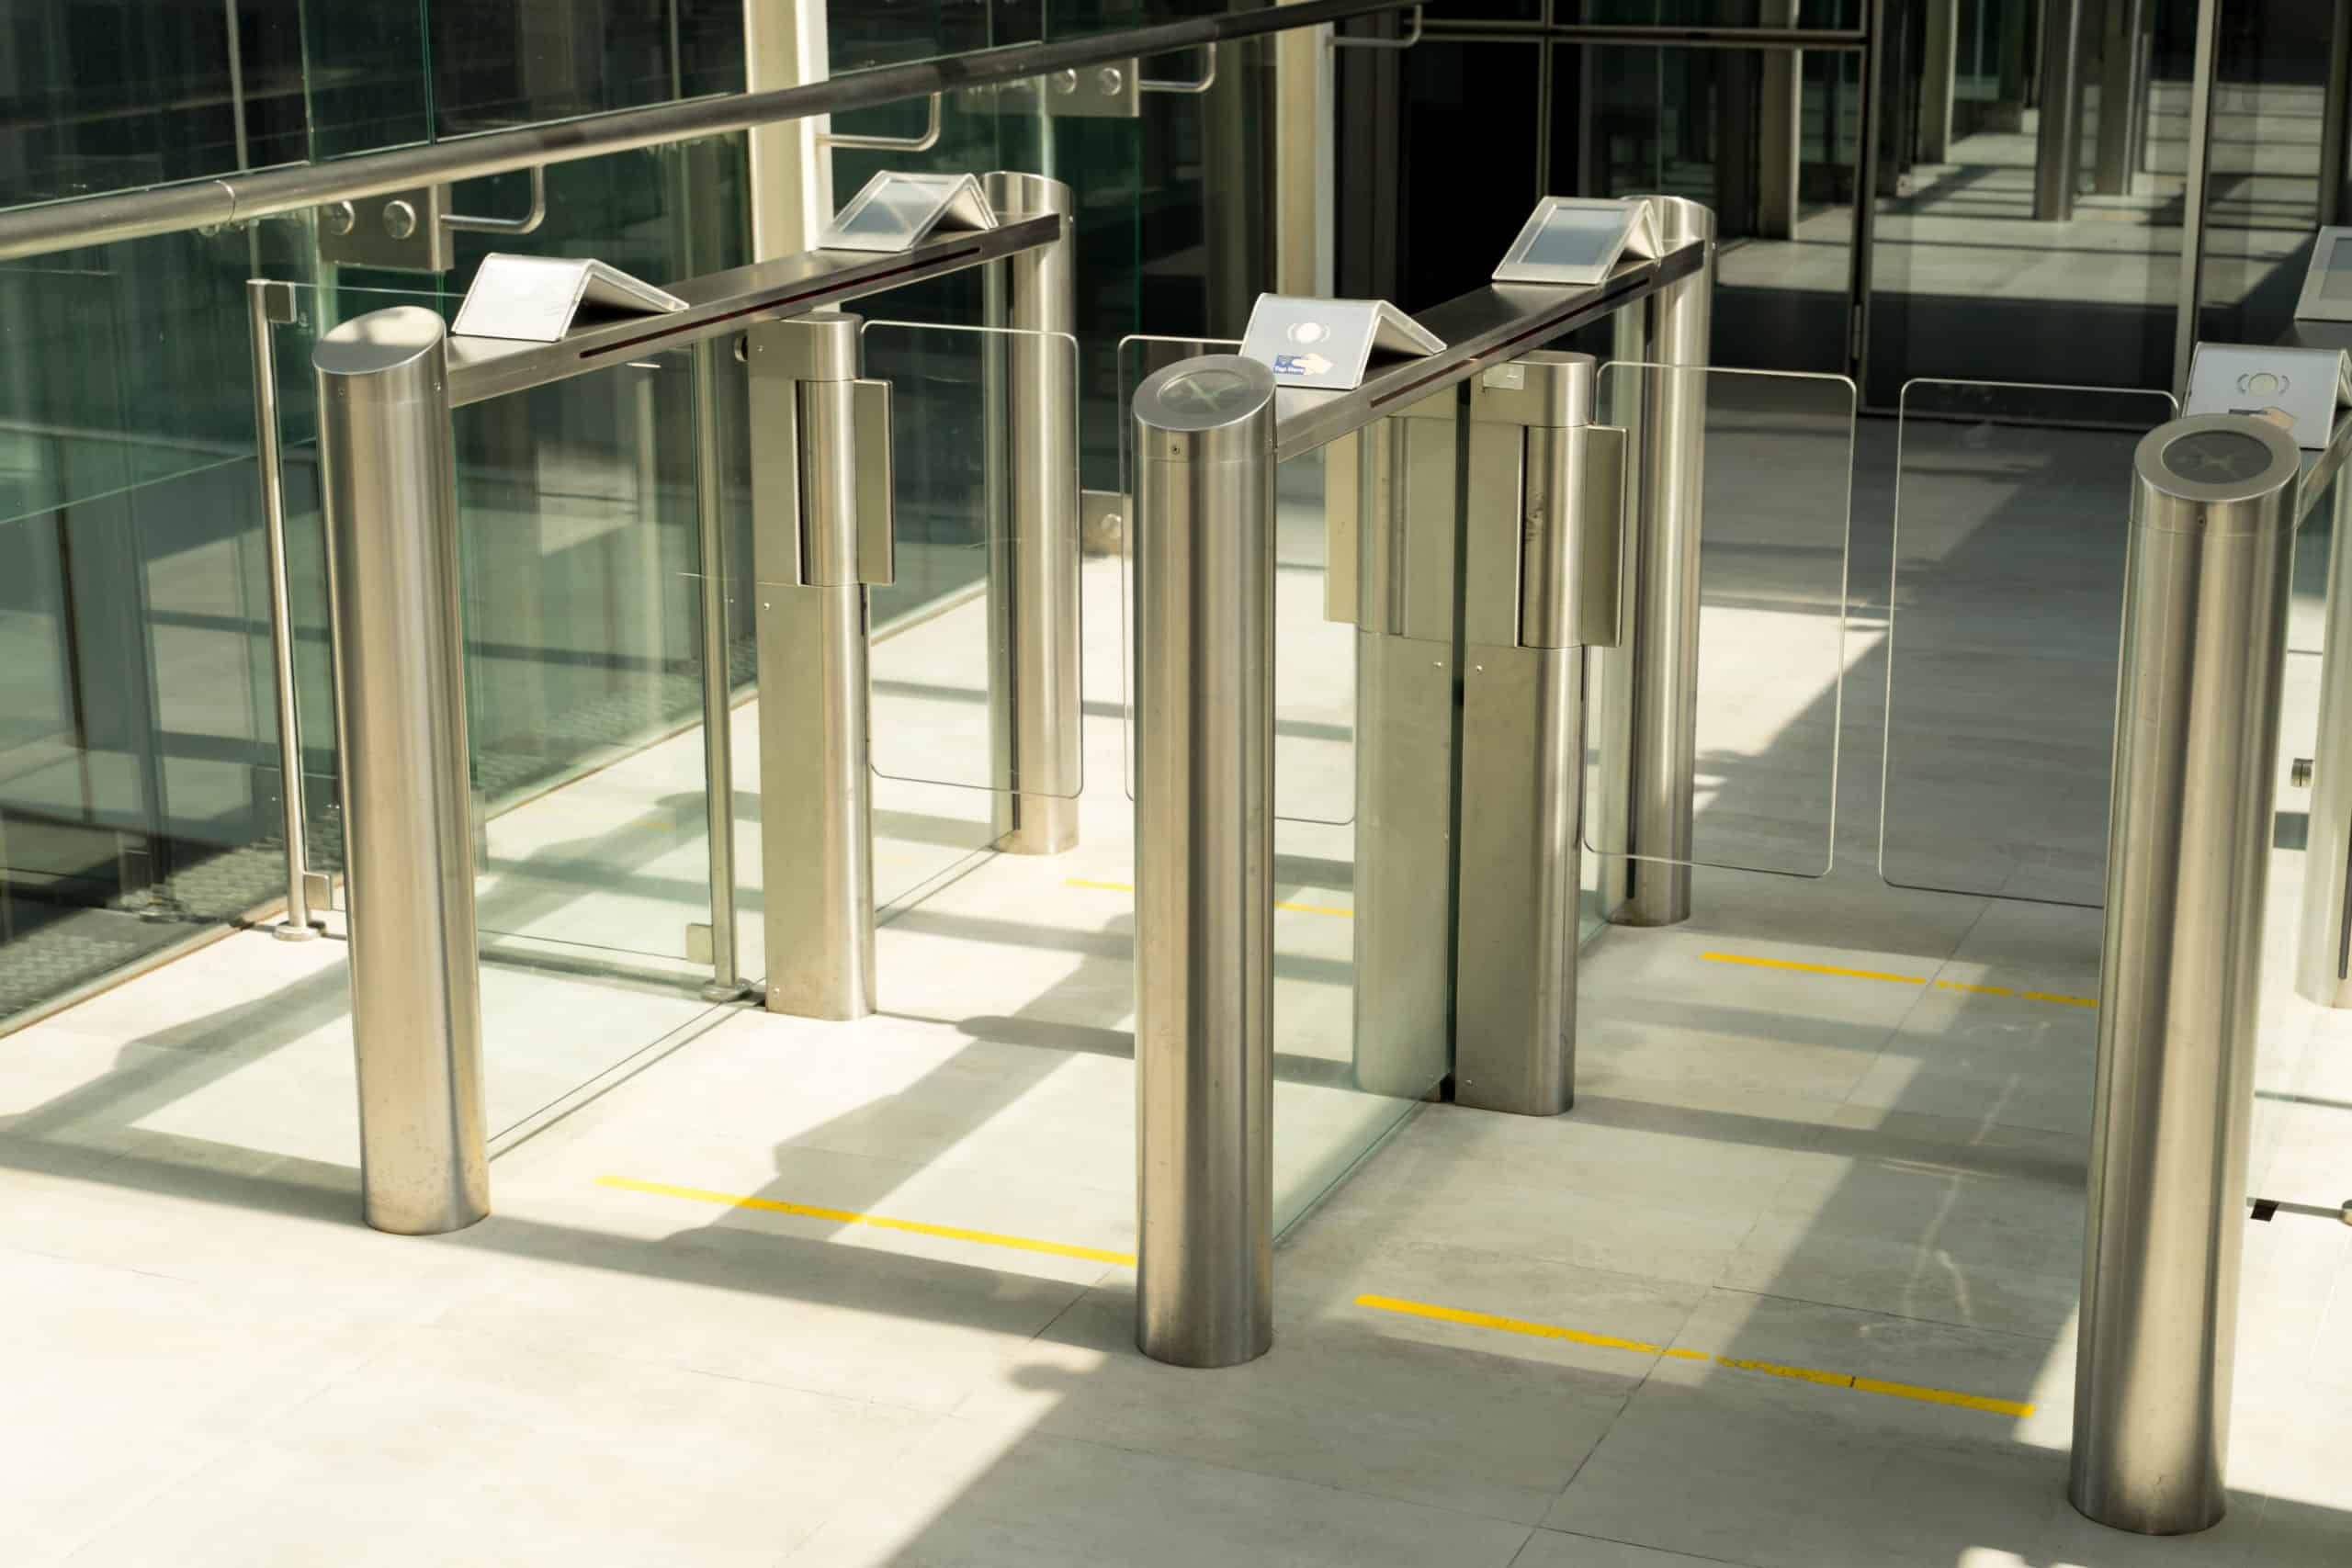 security at an entrance gate for key card access control smart office building